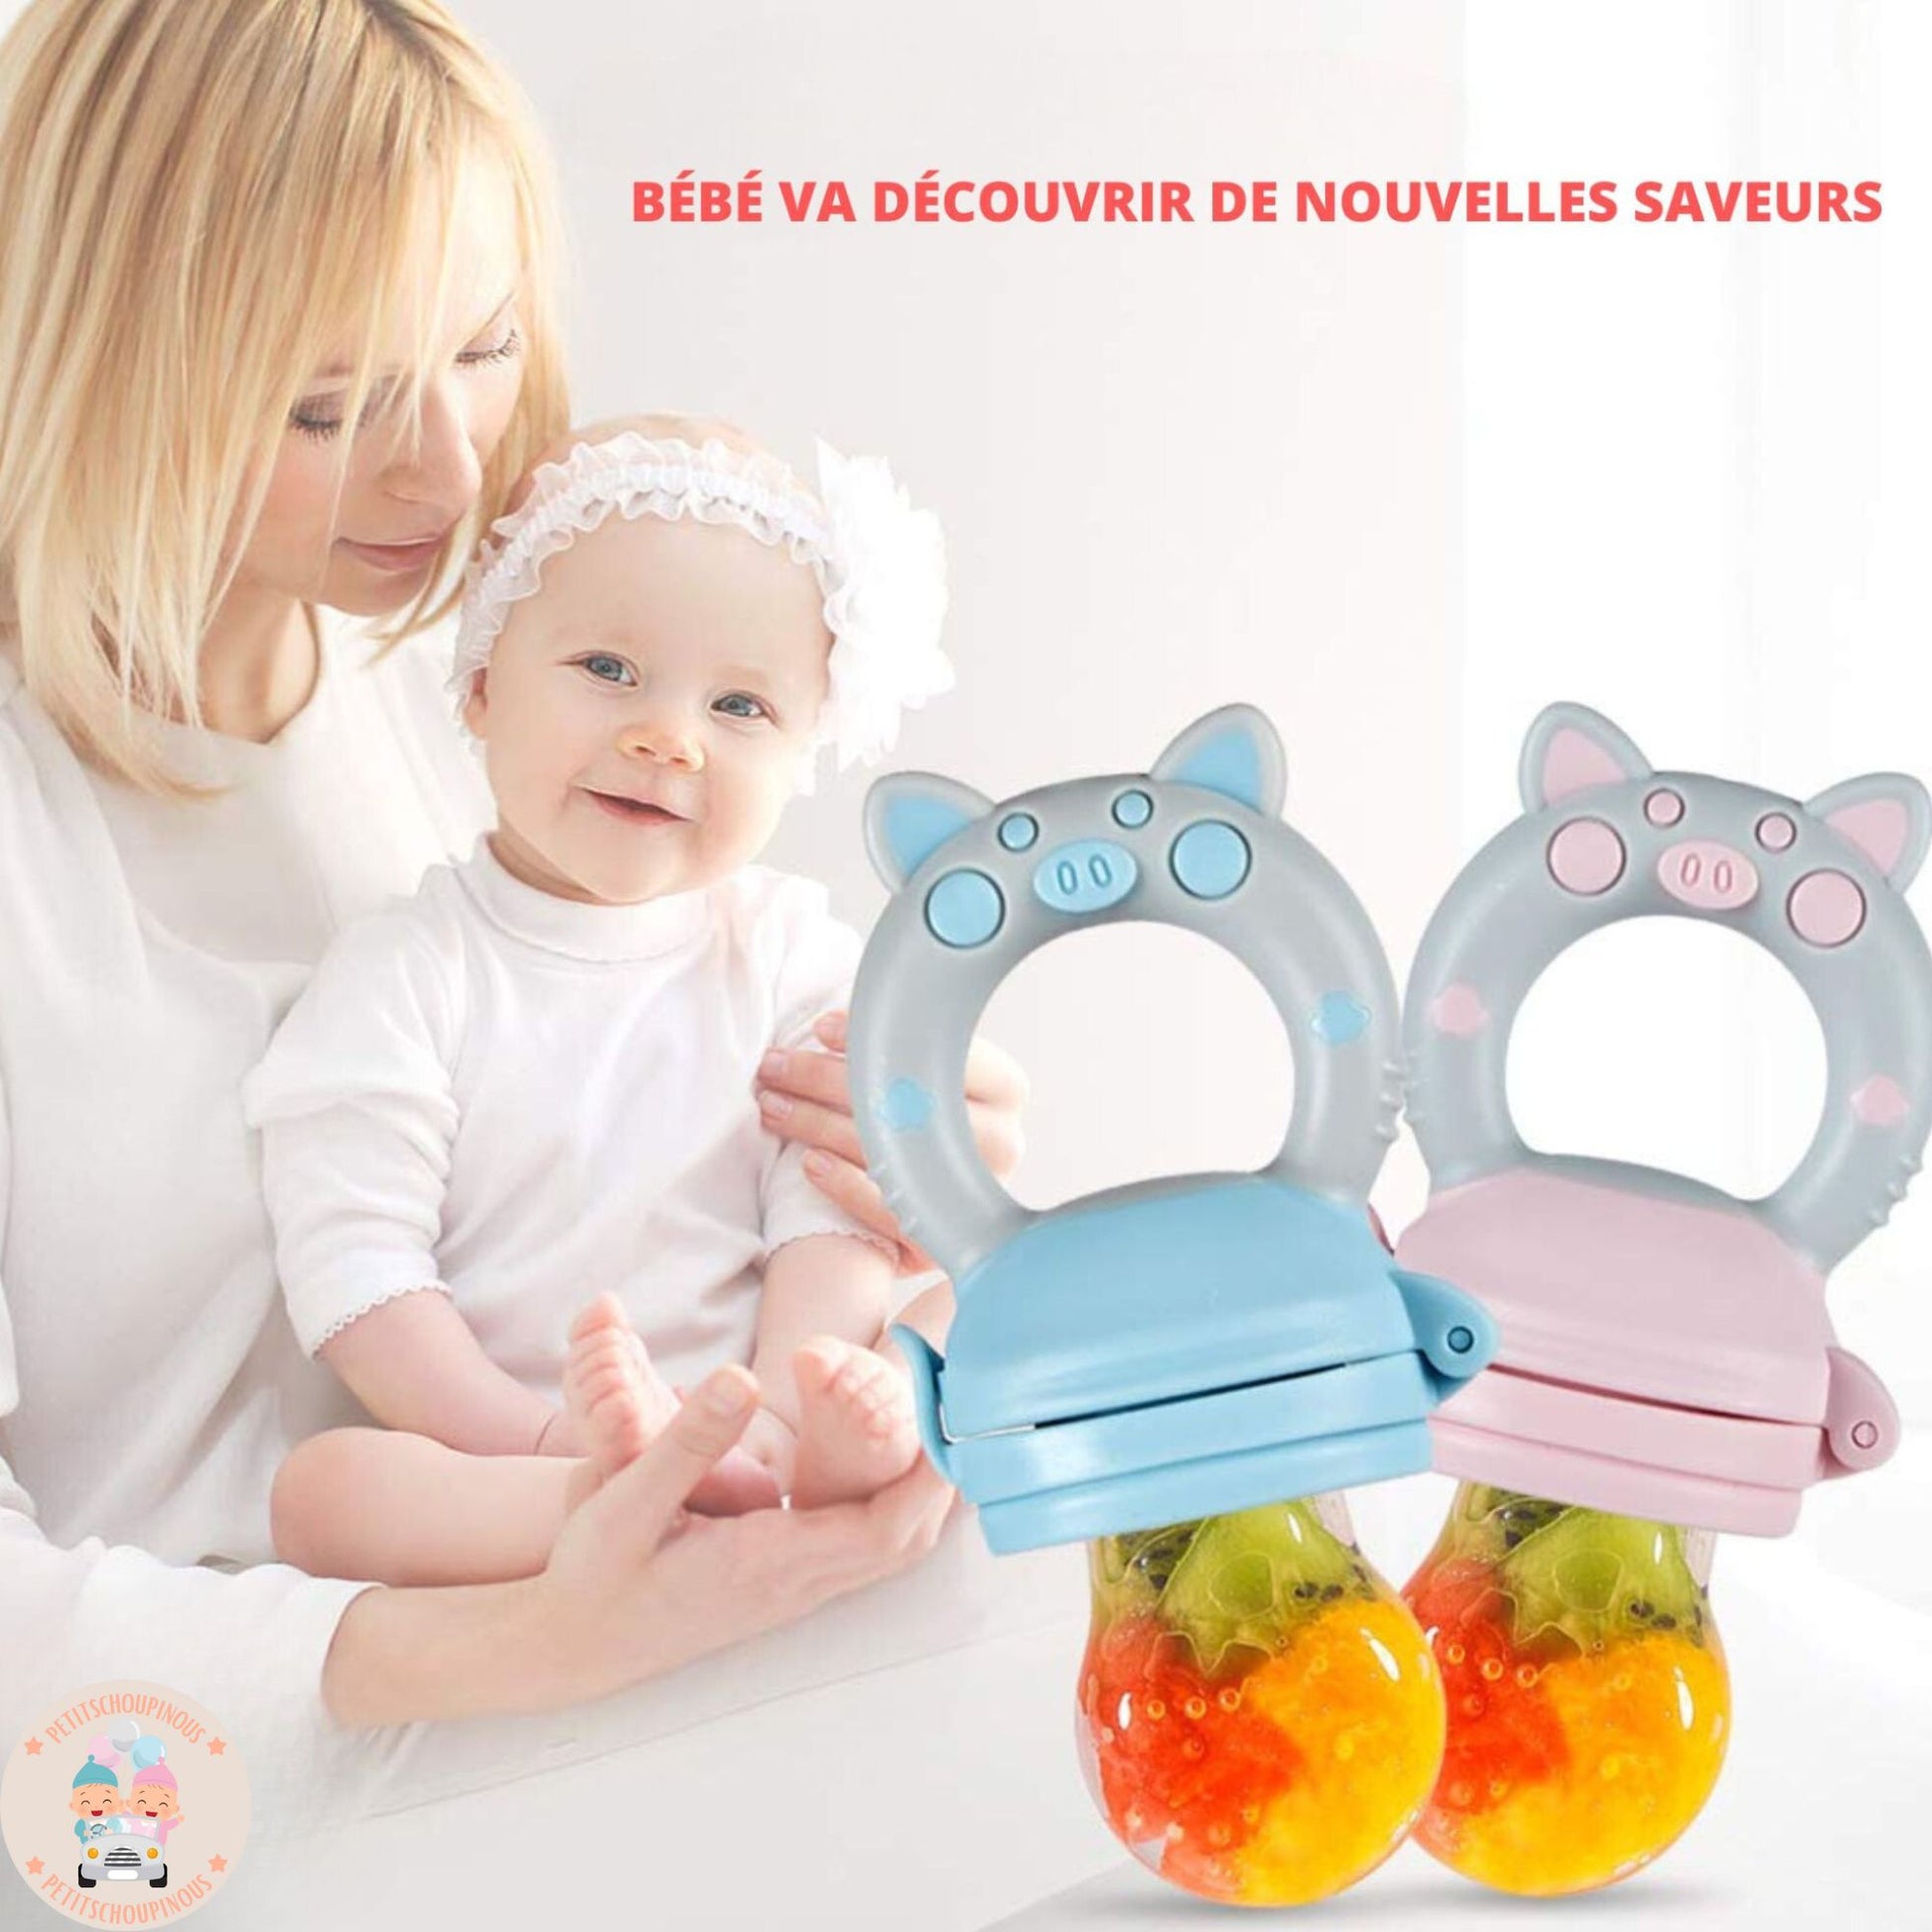 Tetine Grignoteuse - 2 Grignoteuse Bebe Rose + 6 Tétines silicone